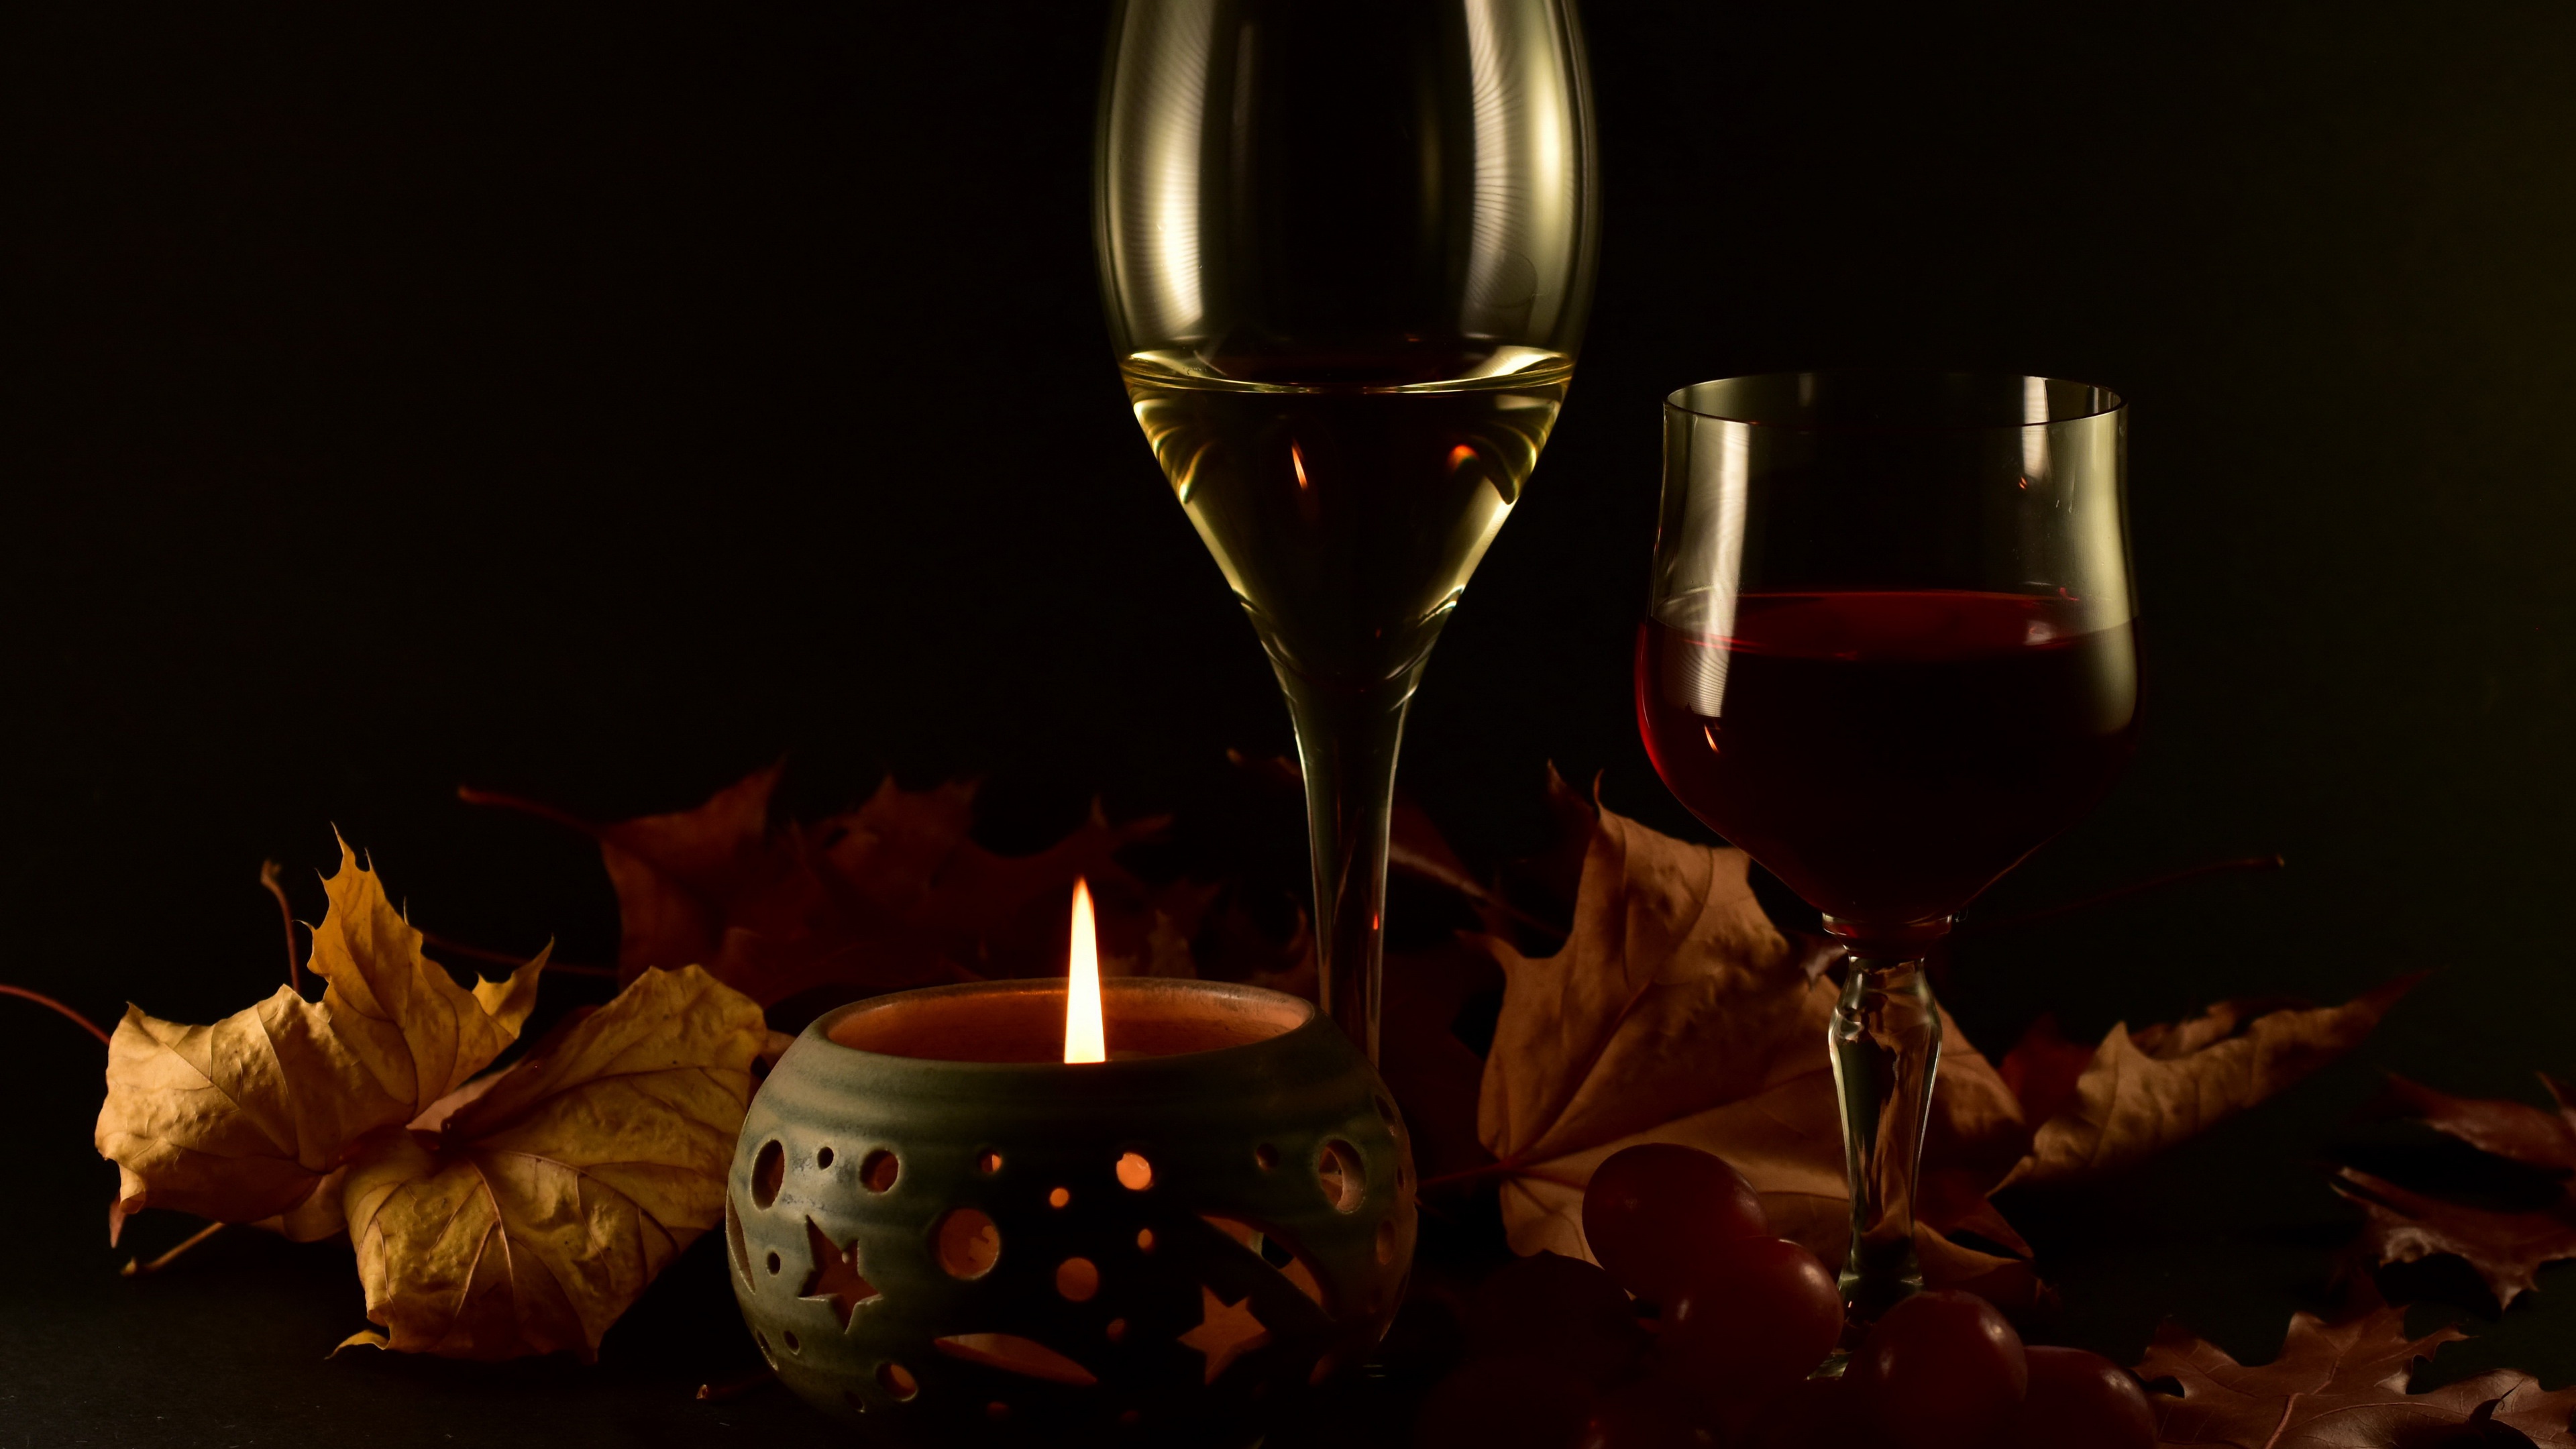 Candle Glass Wine 3840x2160